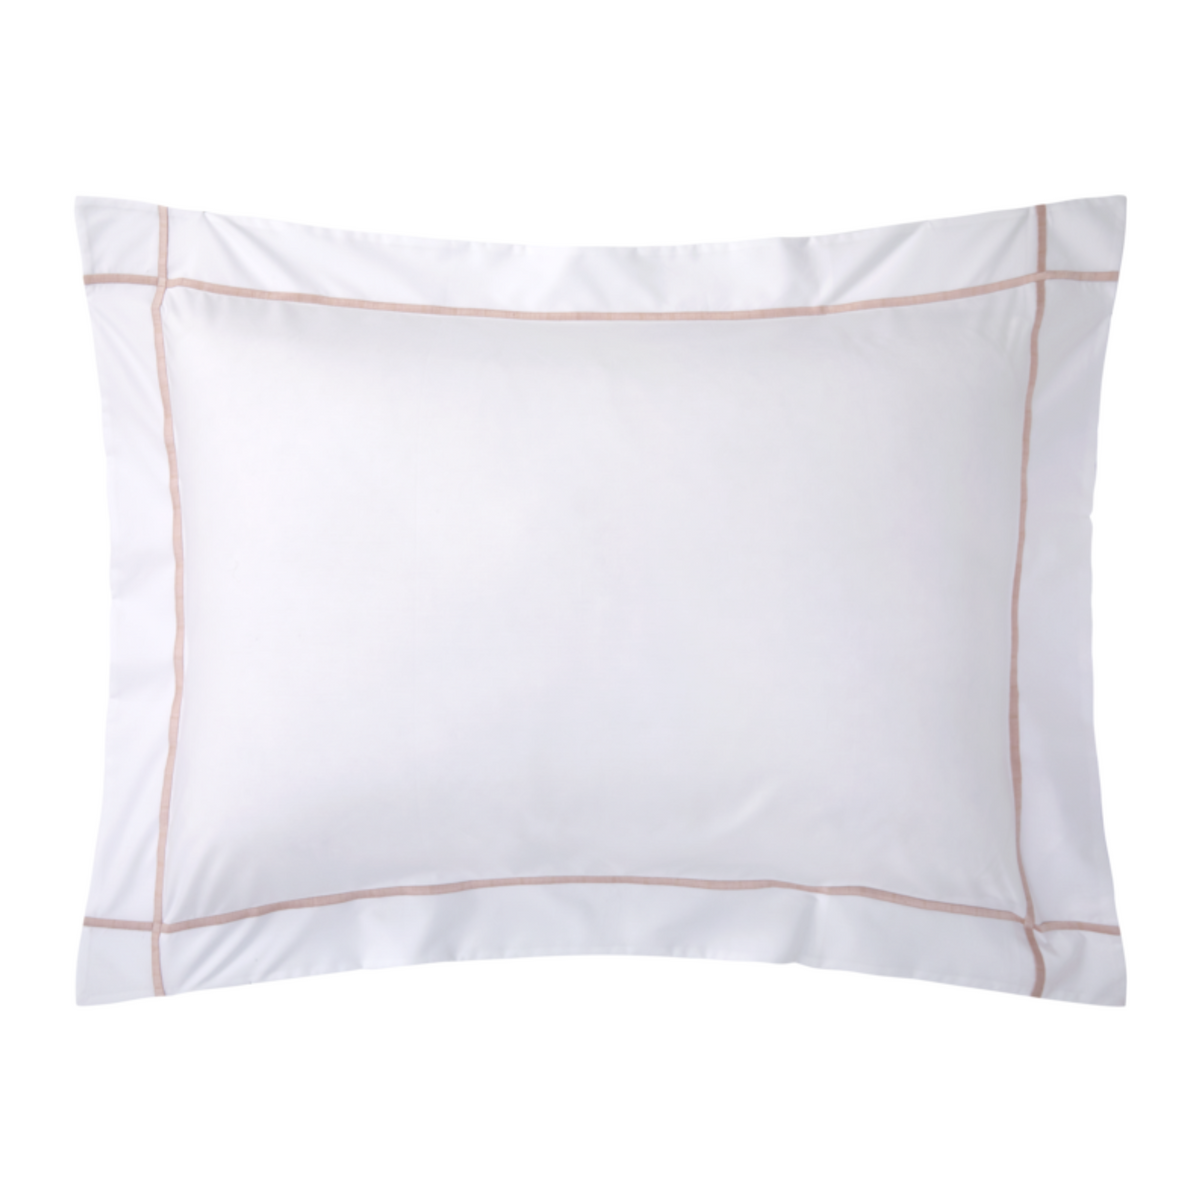 Sham of Yves Delorme Athena Bedding in Poudre Color